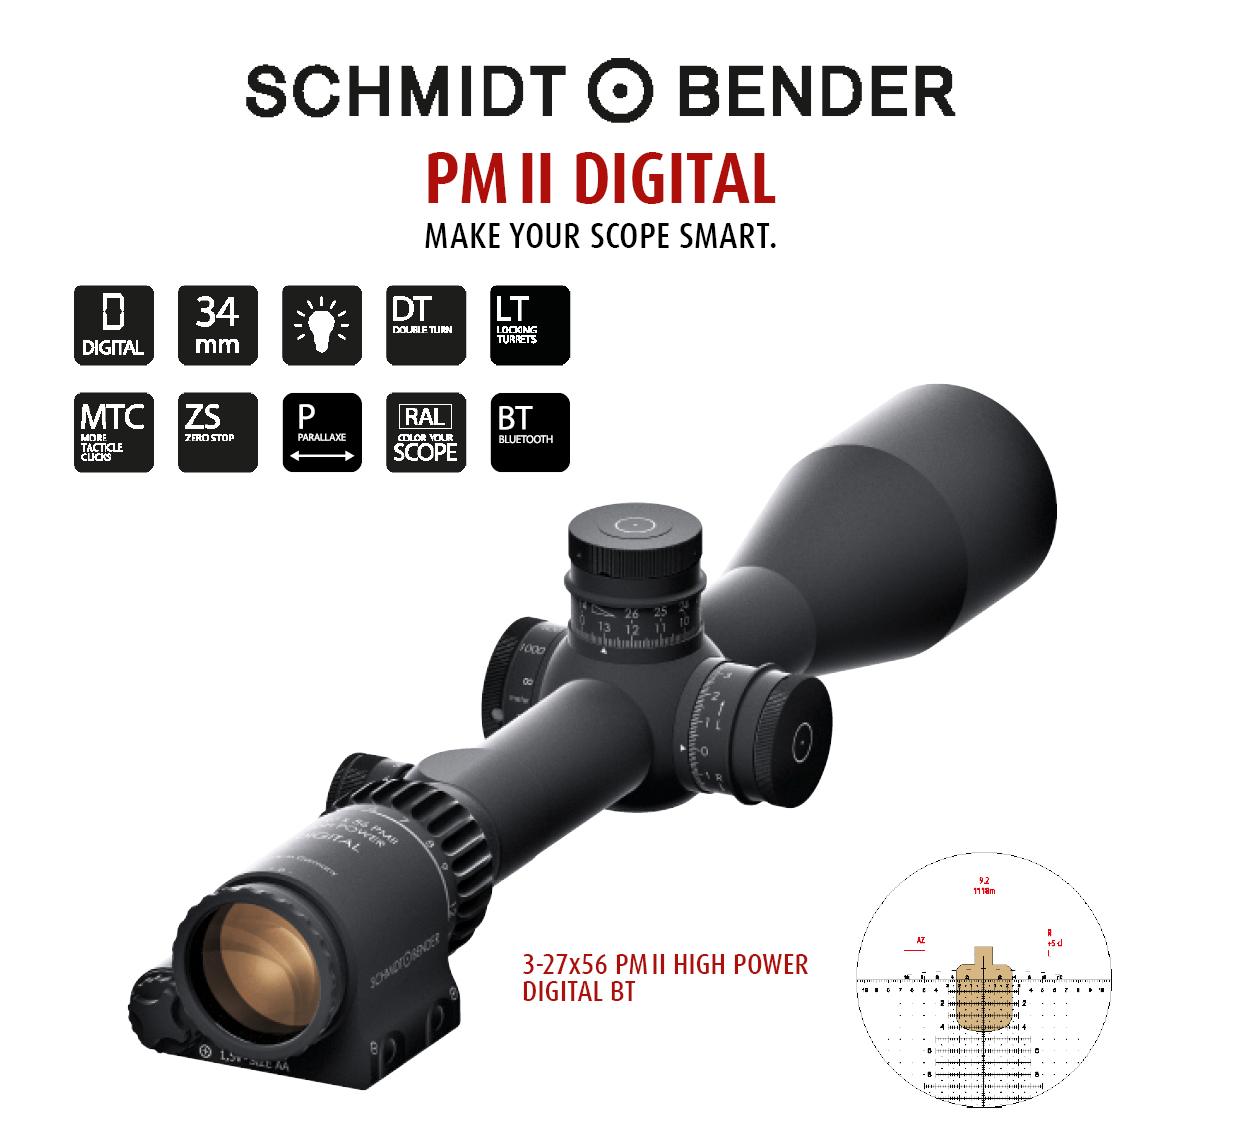 PM II Digital with reticle and performance details